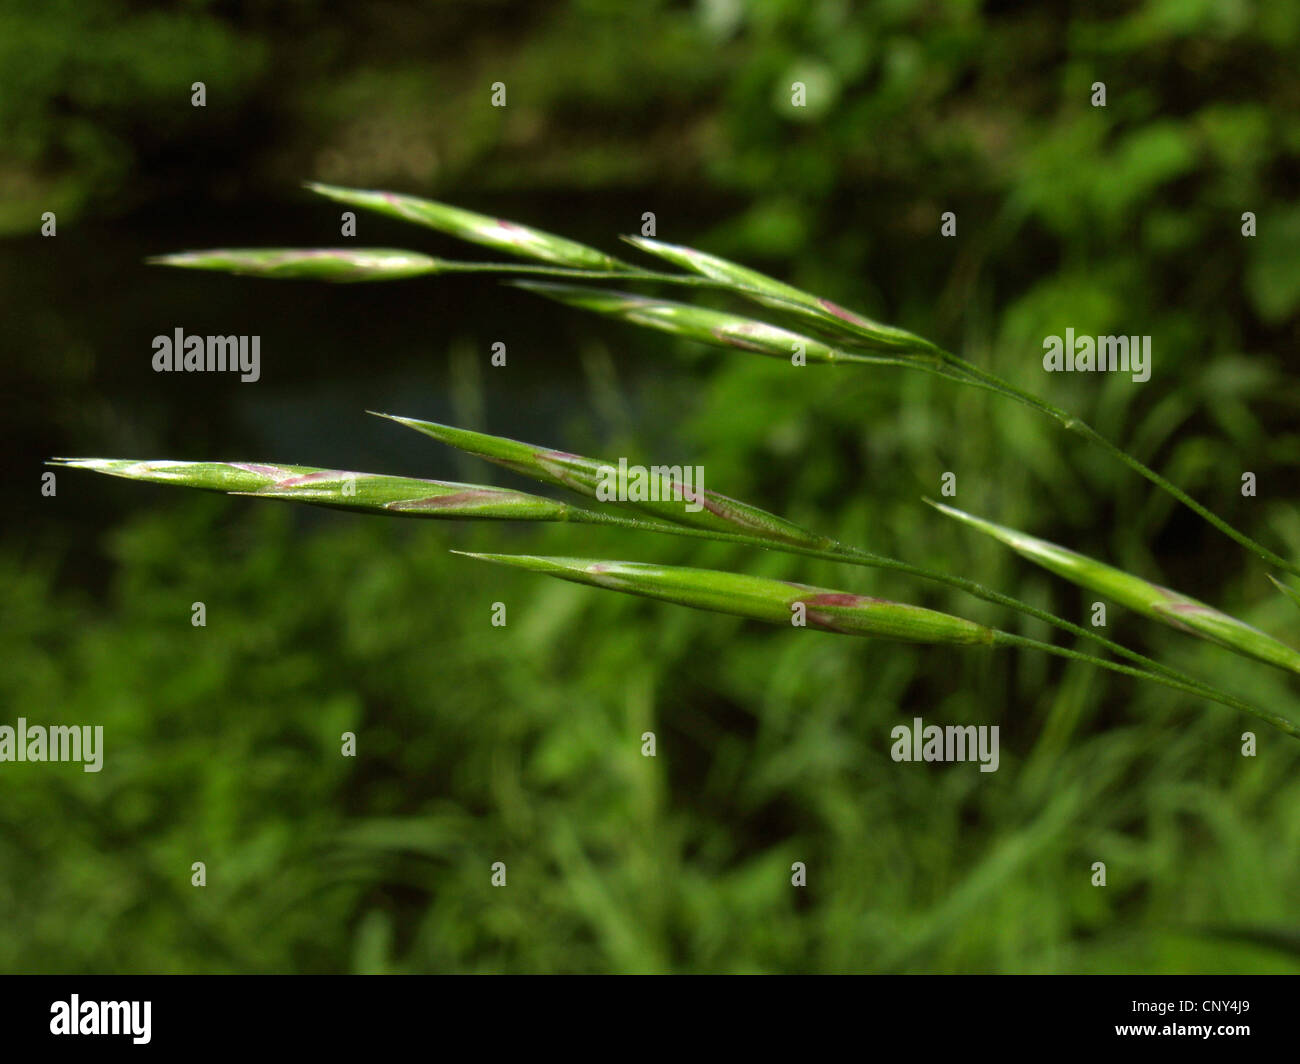 hungarian brome, smooth brome grass (Bromus inermis), blooming, Germany, Thueringen Stock Photo